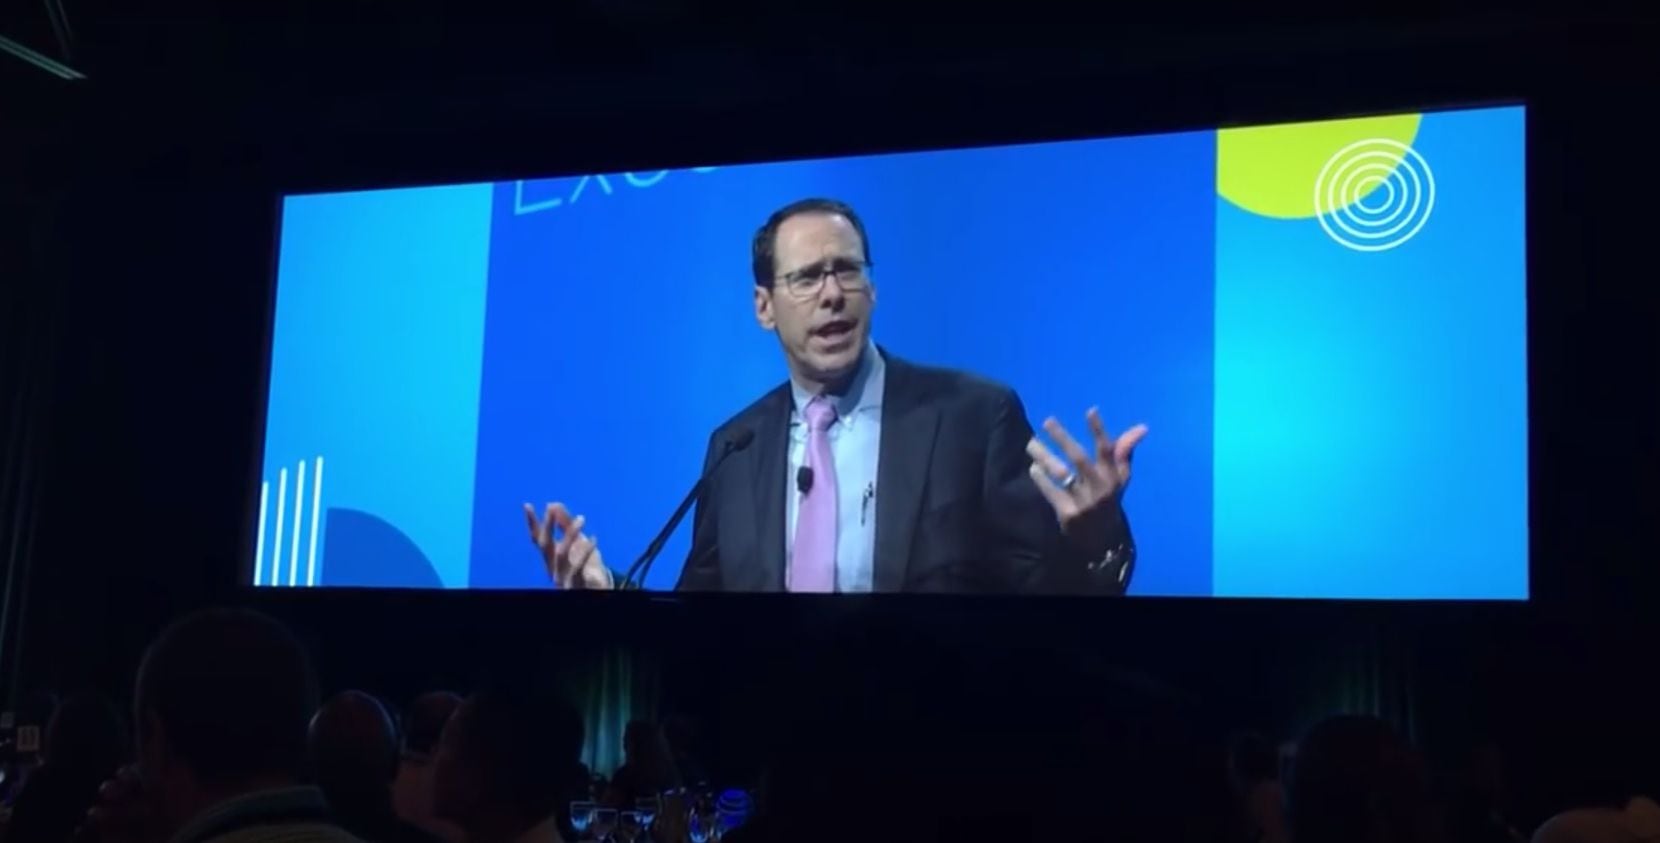 Randall Stephenson, chief executive of AT&T, urged staffers to talk about race during an...